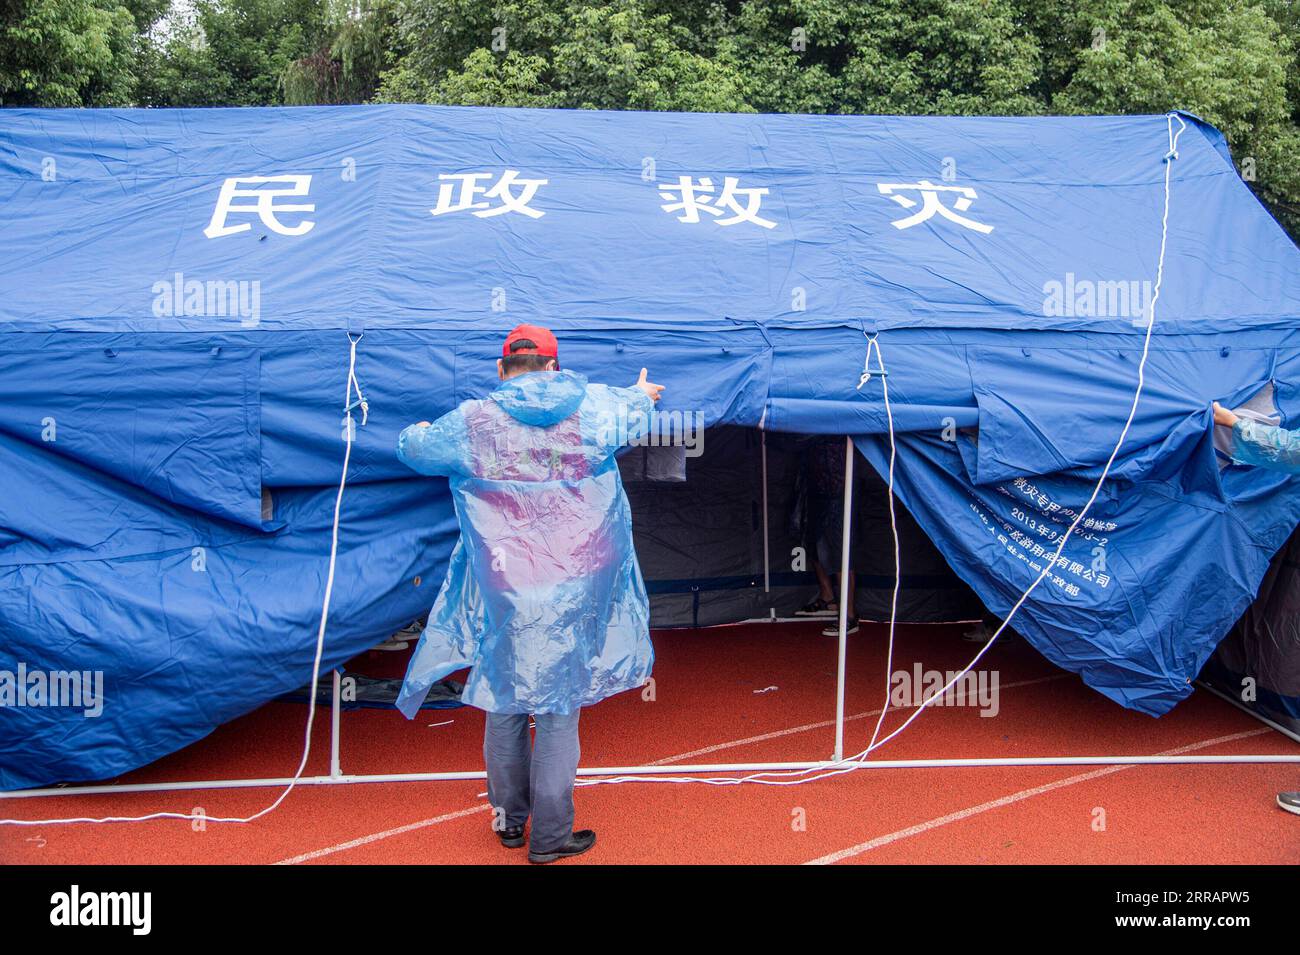 210813 -- SUIZHOU, Aug. 13, 2021 -- A rescuer puts up a tent in Liulin Township of Suixian County, central China s Hubei Province, Aug. 13, 2021. Twenty-one people were killed and four others missing as heavy rain lashed Liulin Township from Wednesday to Thursday, local authorities said Friday. The Liulin Township saw total precipitation reaching 503 mm from 9 p.m. Wednesday to 9 a.m. Thursday, causing an average waterlogging depth of 3.5 meters, the county said in an announcement. Over 8,000 people have been affected in the township, according to the announcement. Disaster relief and rescue e Stock Photo